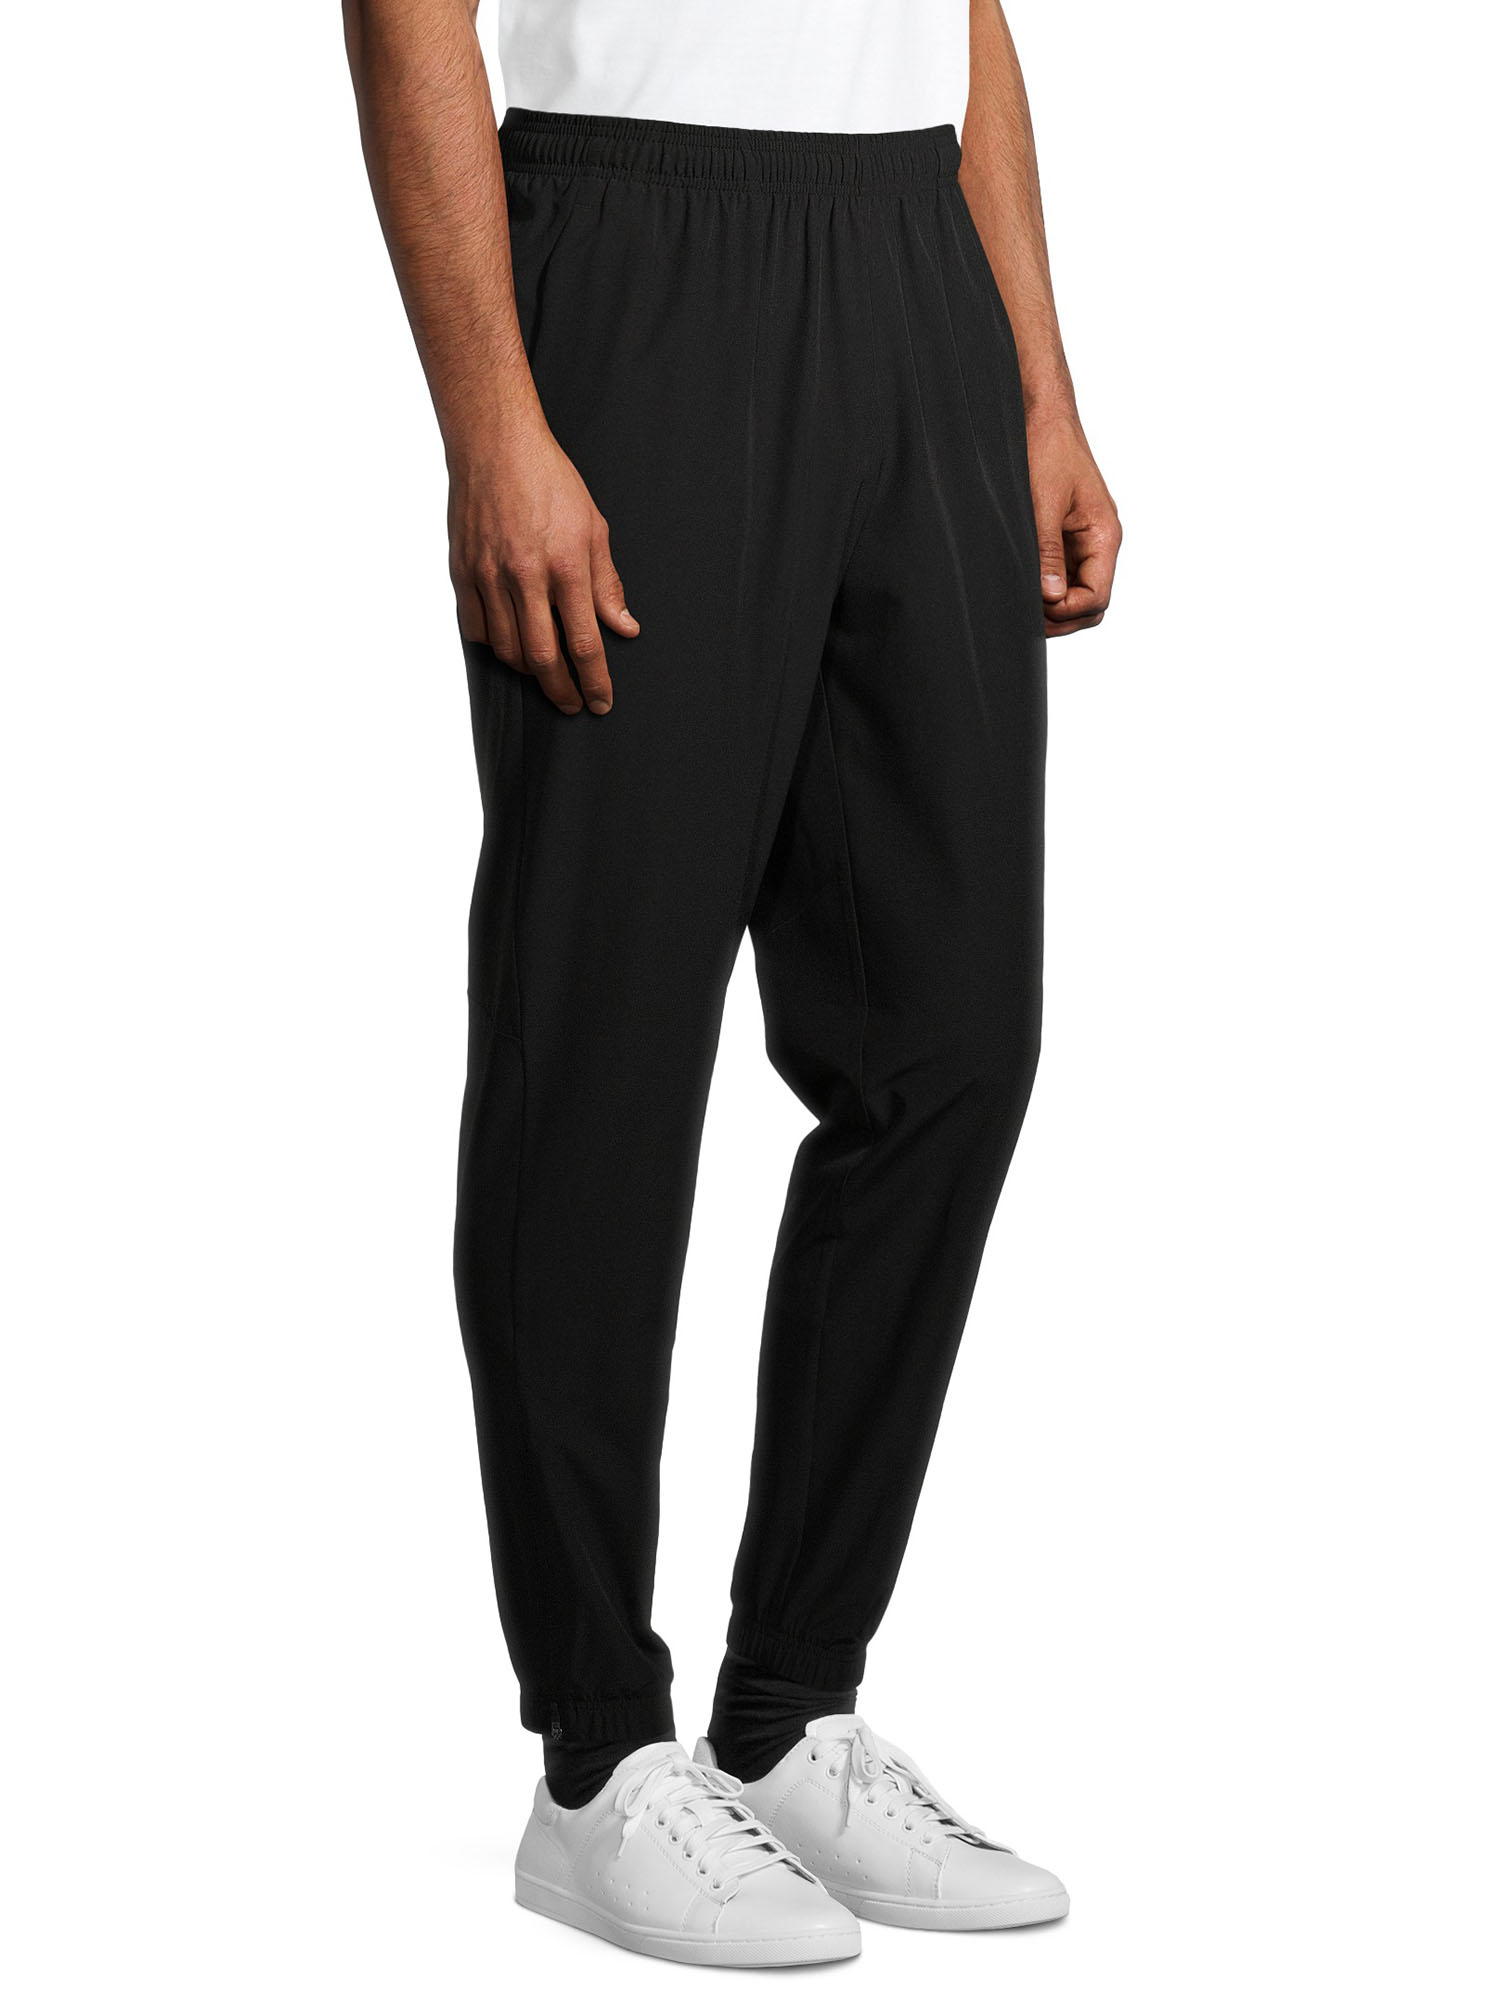 Russell Mens and Big Mens Active Woven Joggers - image 3 of 6